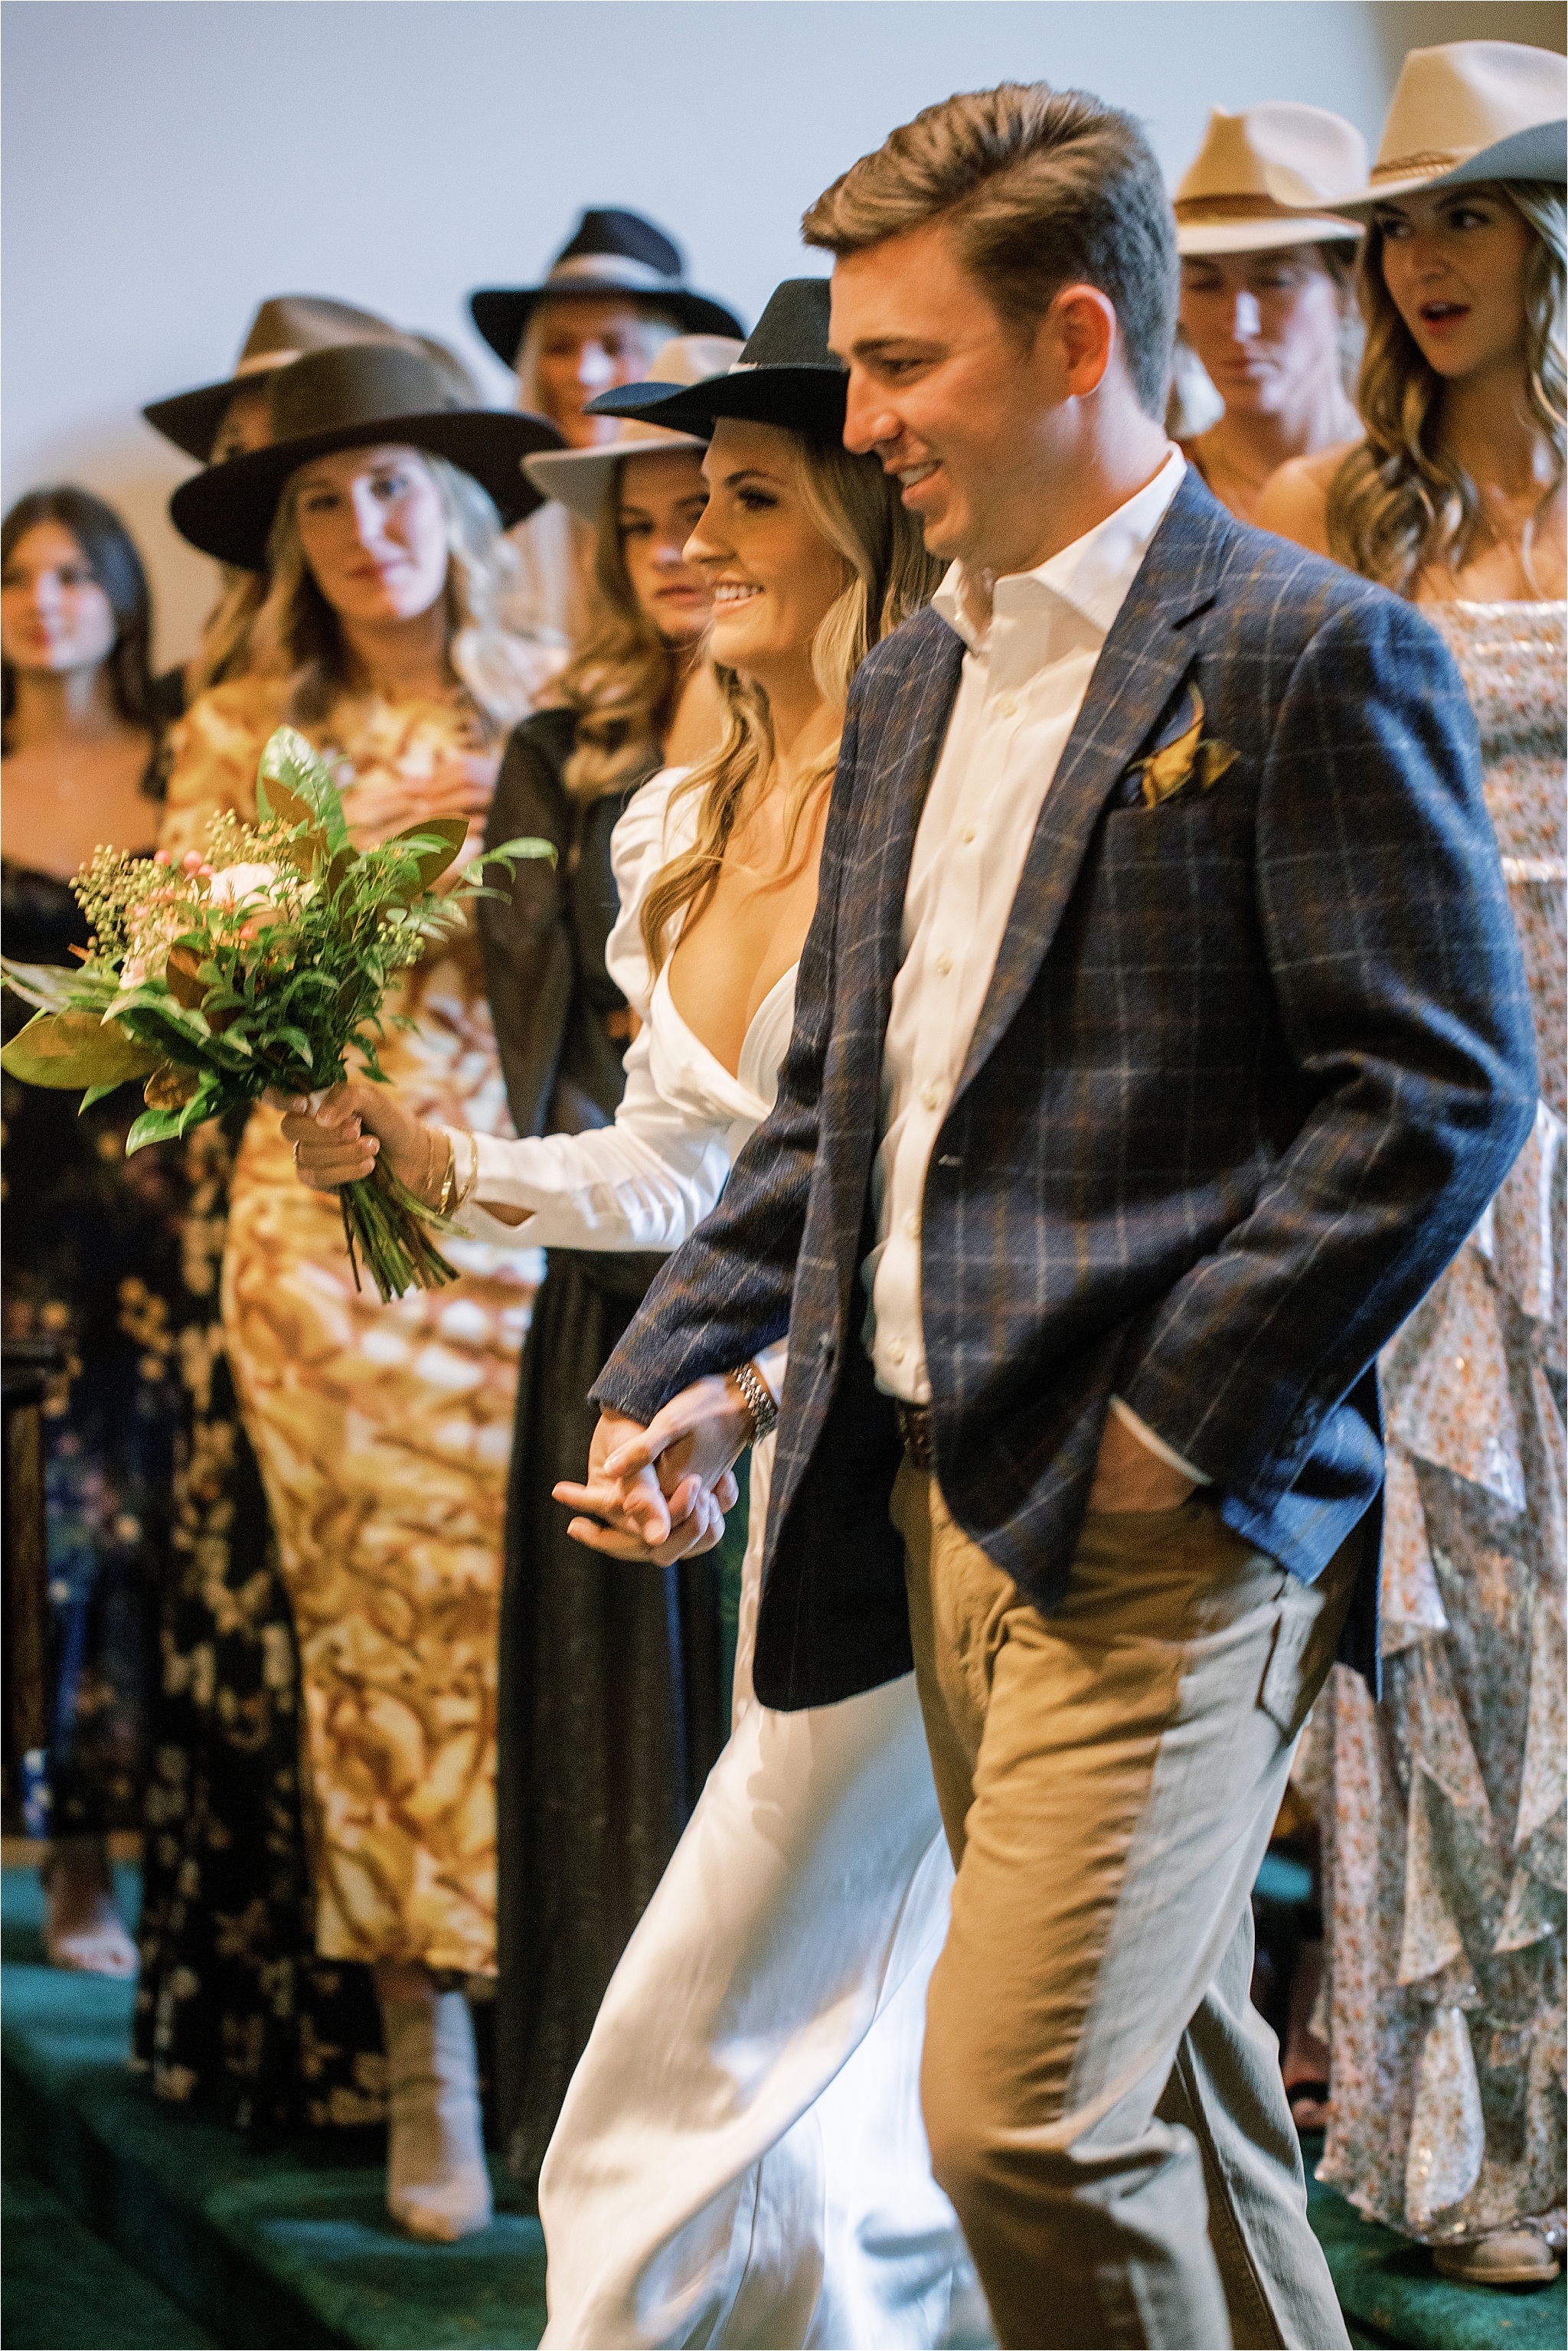 Vail Wedding, Four Seasons Vail Wedding, Charleston Couple, The Slope Room, Gravity Haus, Vail Interfaith Chapel, Kemosabe Wedding, Kemosabe Hats on Bridal Party, Western Chic Themed Welcome Party, Colorado Western Chic, Rehearsal dinner, Western wedding